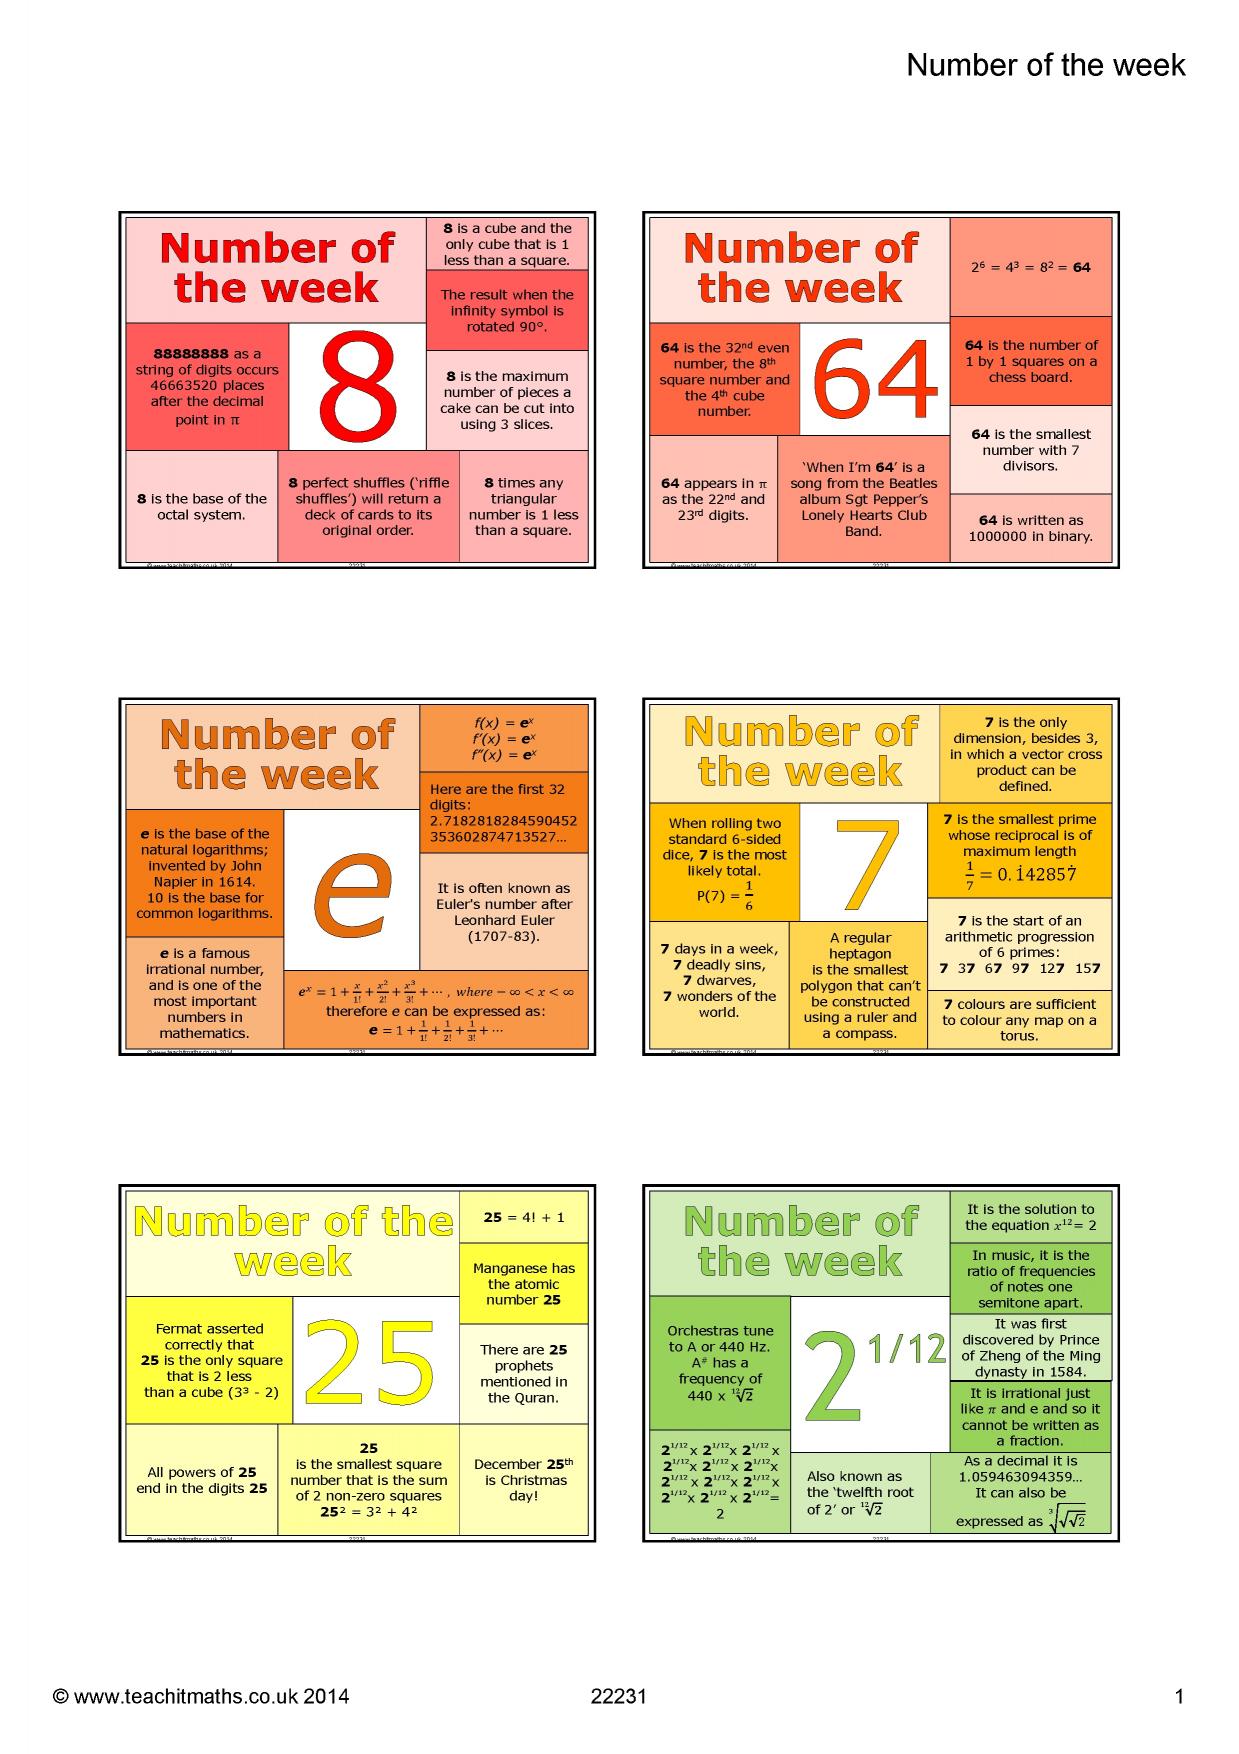 The number of the week - Number - Posters and displays - Home page1239 x 1754